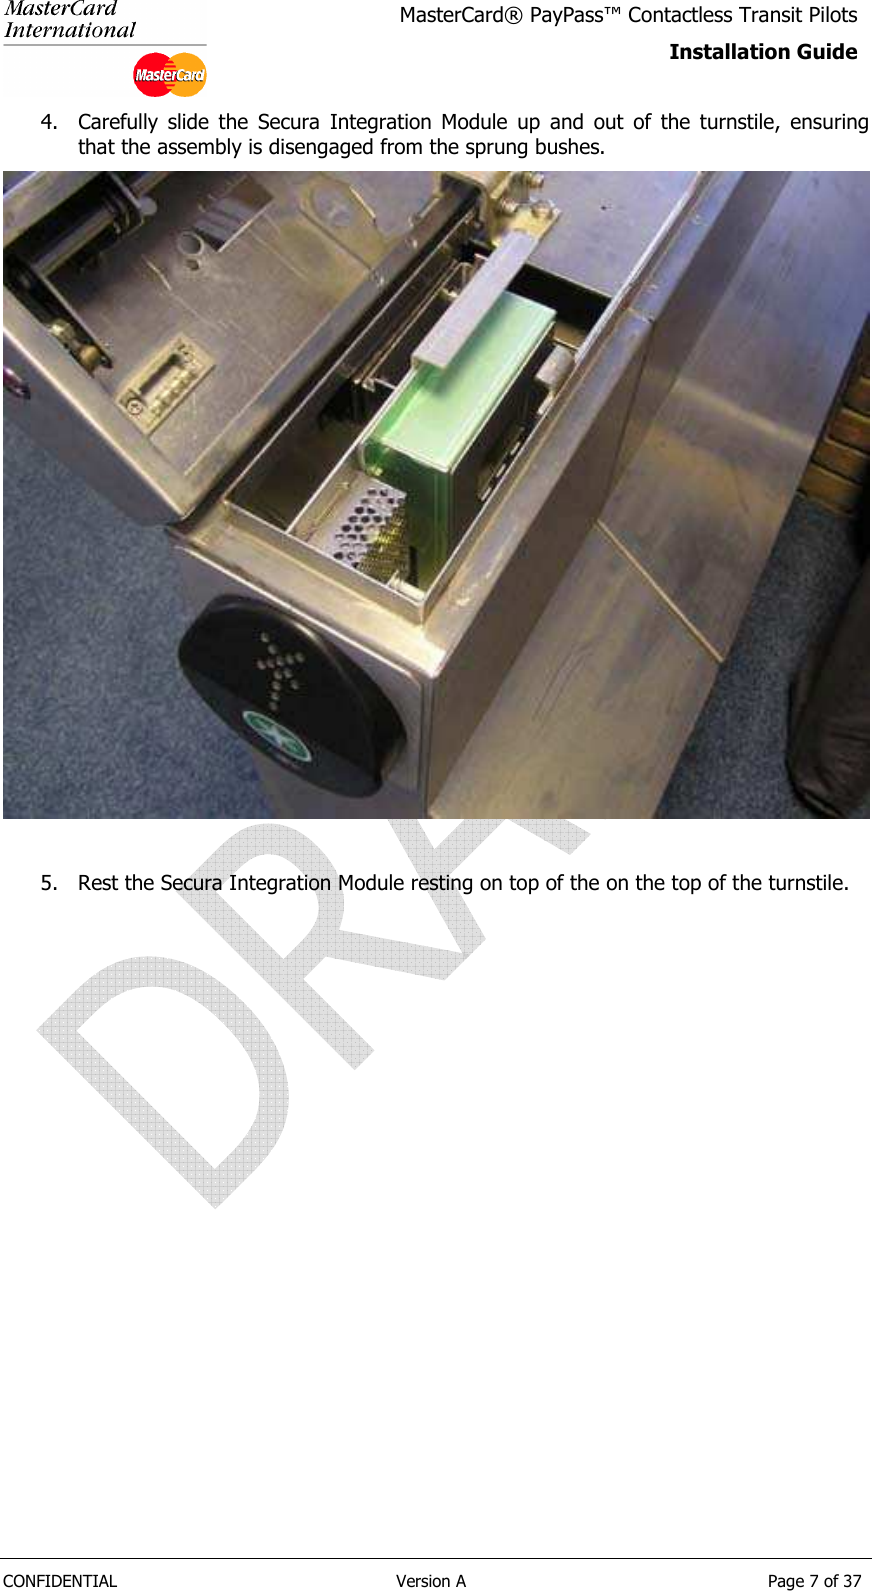   CONFIDENTIAL  Version A  Page 7 of 37 MasterCard® PayPass™ Contactless Transit Pilots Installation Guide  4. Carefully  slide  the  Secura  Integration  Module  up  and  out  of  the  turnstile,  ensuring that the assembly is disengaged from the sprung bushes.   5. Rest the Secura Integration Module resting on top of the on the top of the turnstile. 